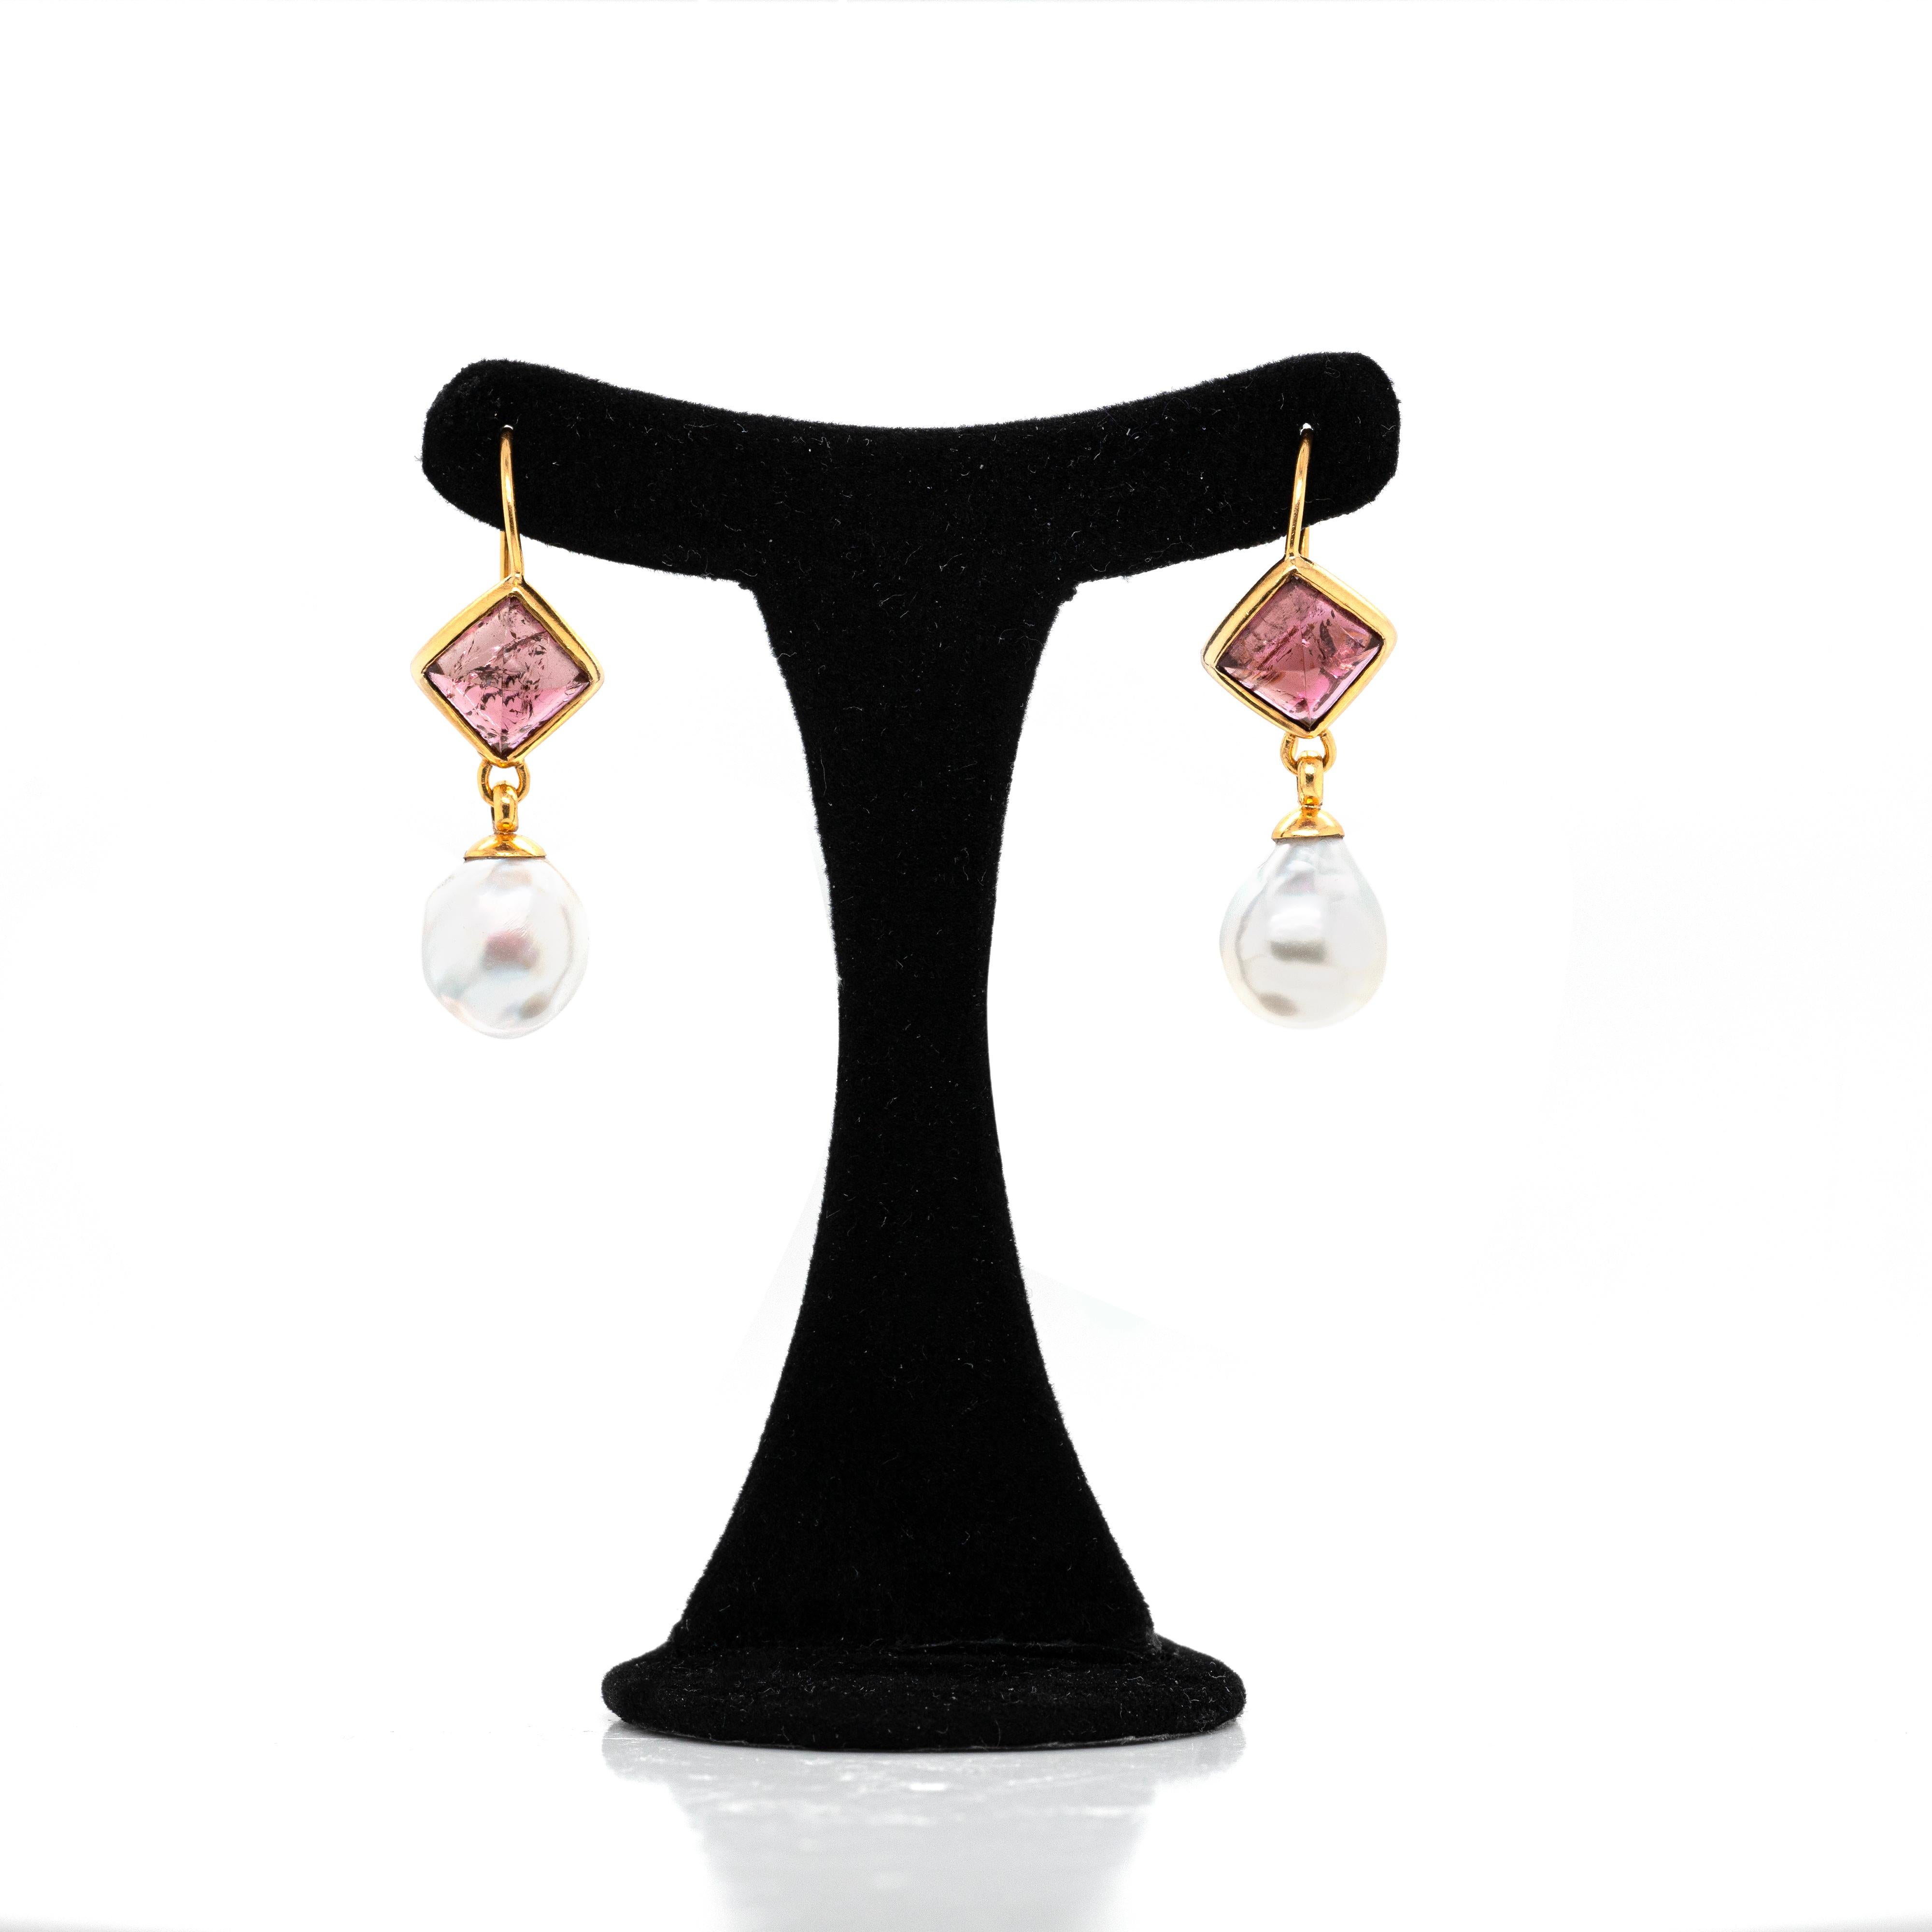 These wonderful 21 carat yellow gold drop earrings feature each a 10.5 x 10.5 mm pyramid cabochon tourmaline, mounted in rub-over square settings. The earrings are then finished with carefully paired baroque South Sea pearls measuring approximately